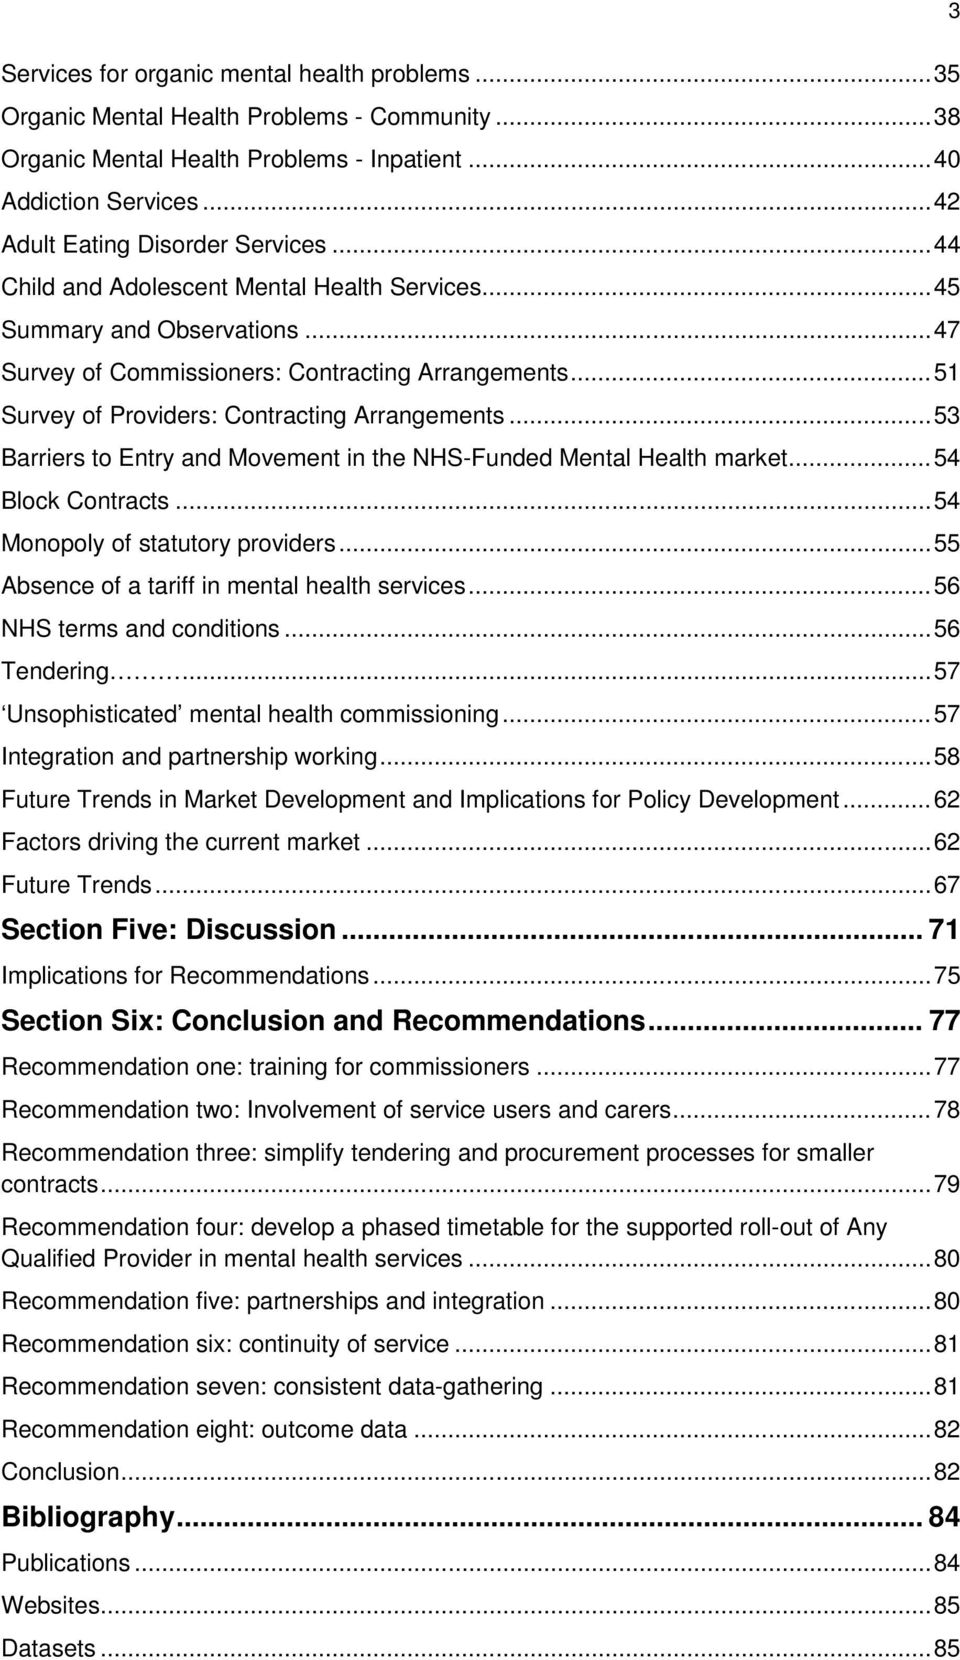 .. 53 Barriers to Entry and Movement in the NHS-Funded Mental Health market... 54 Block Contracts... 54 Monopoly of statutory providers... 55 Absence of a tariff in services.